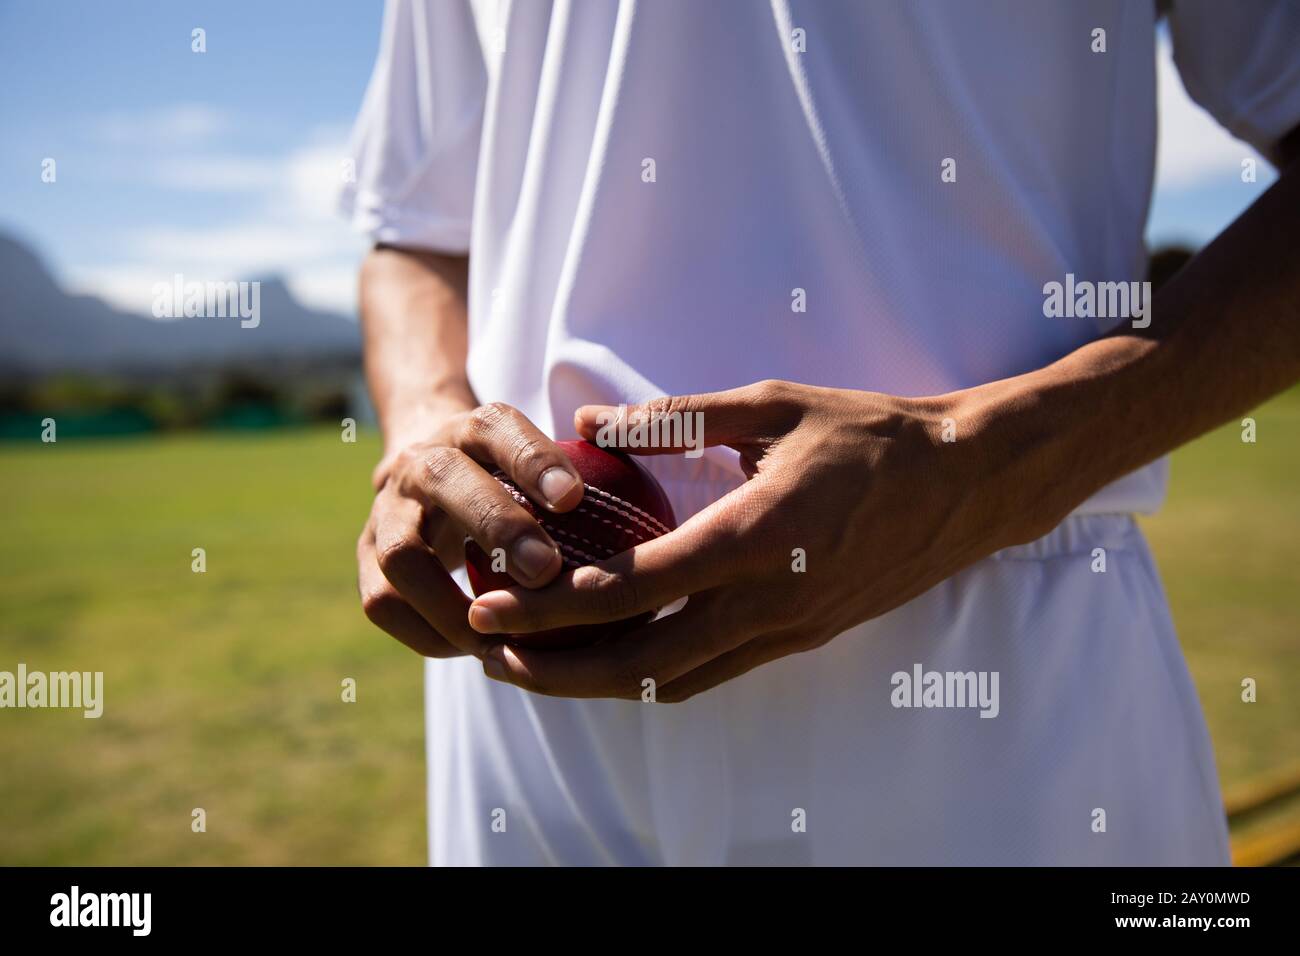 Cricket player standing and holding a ball Stock Photo